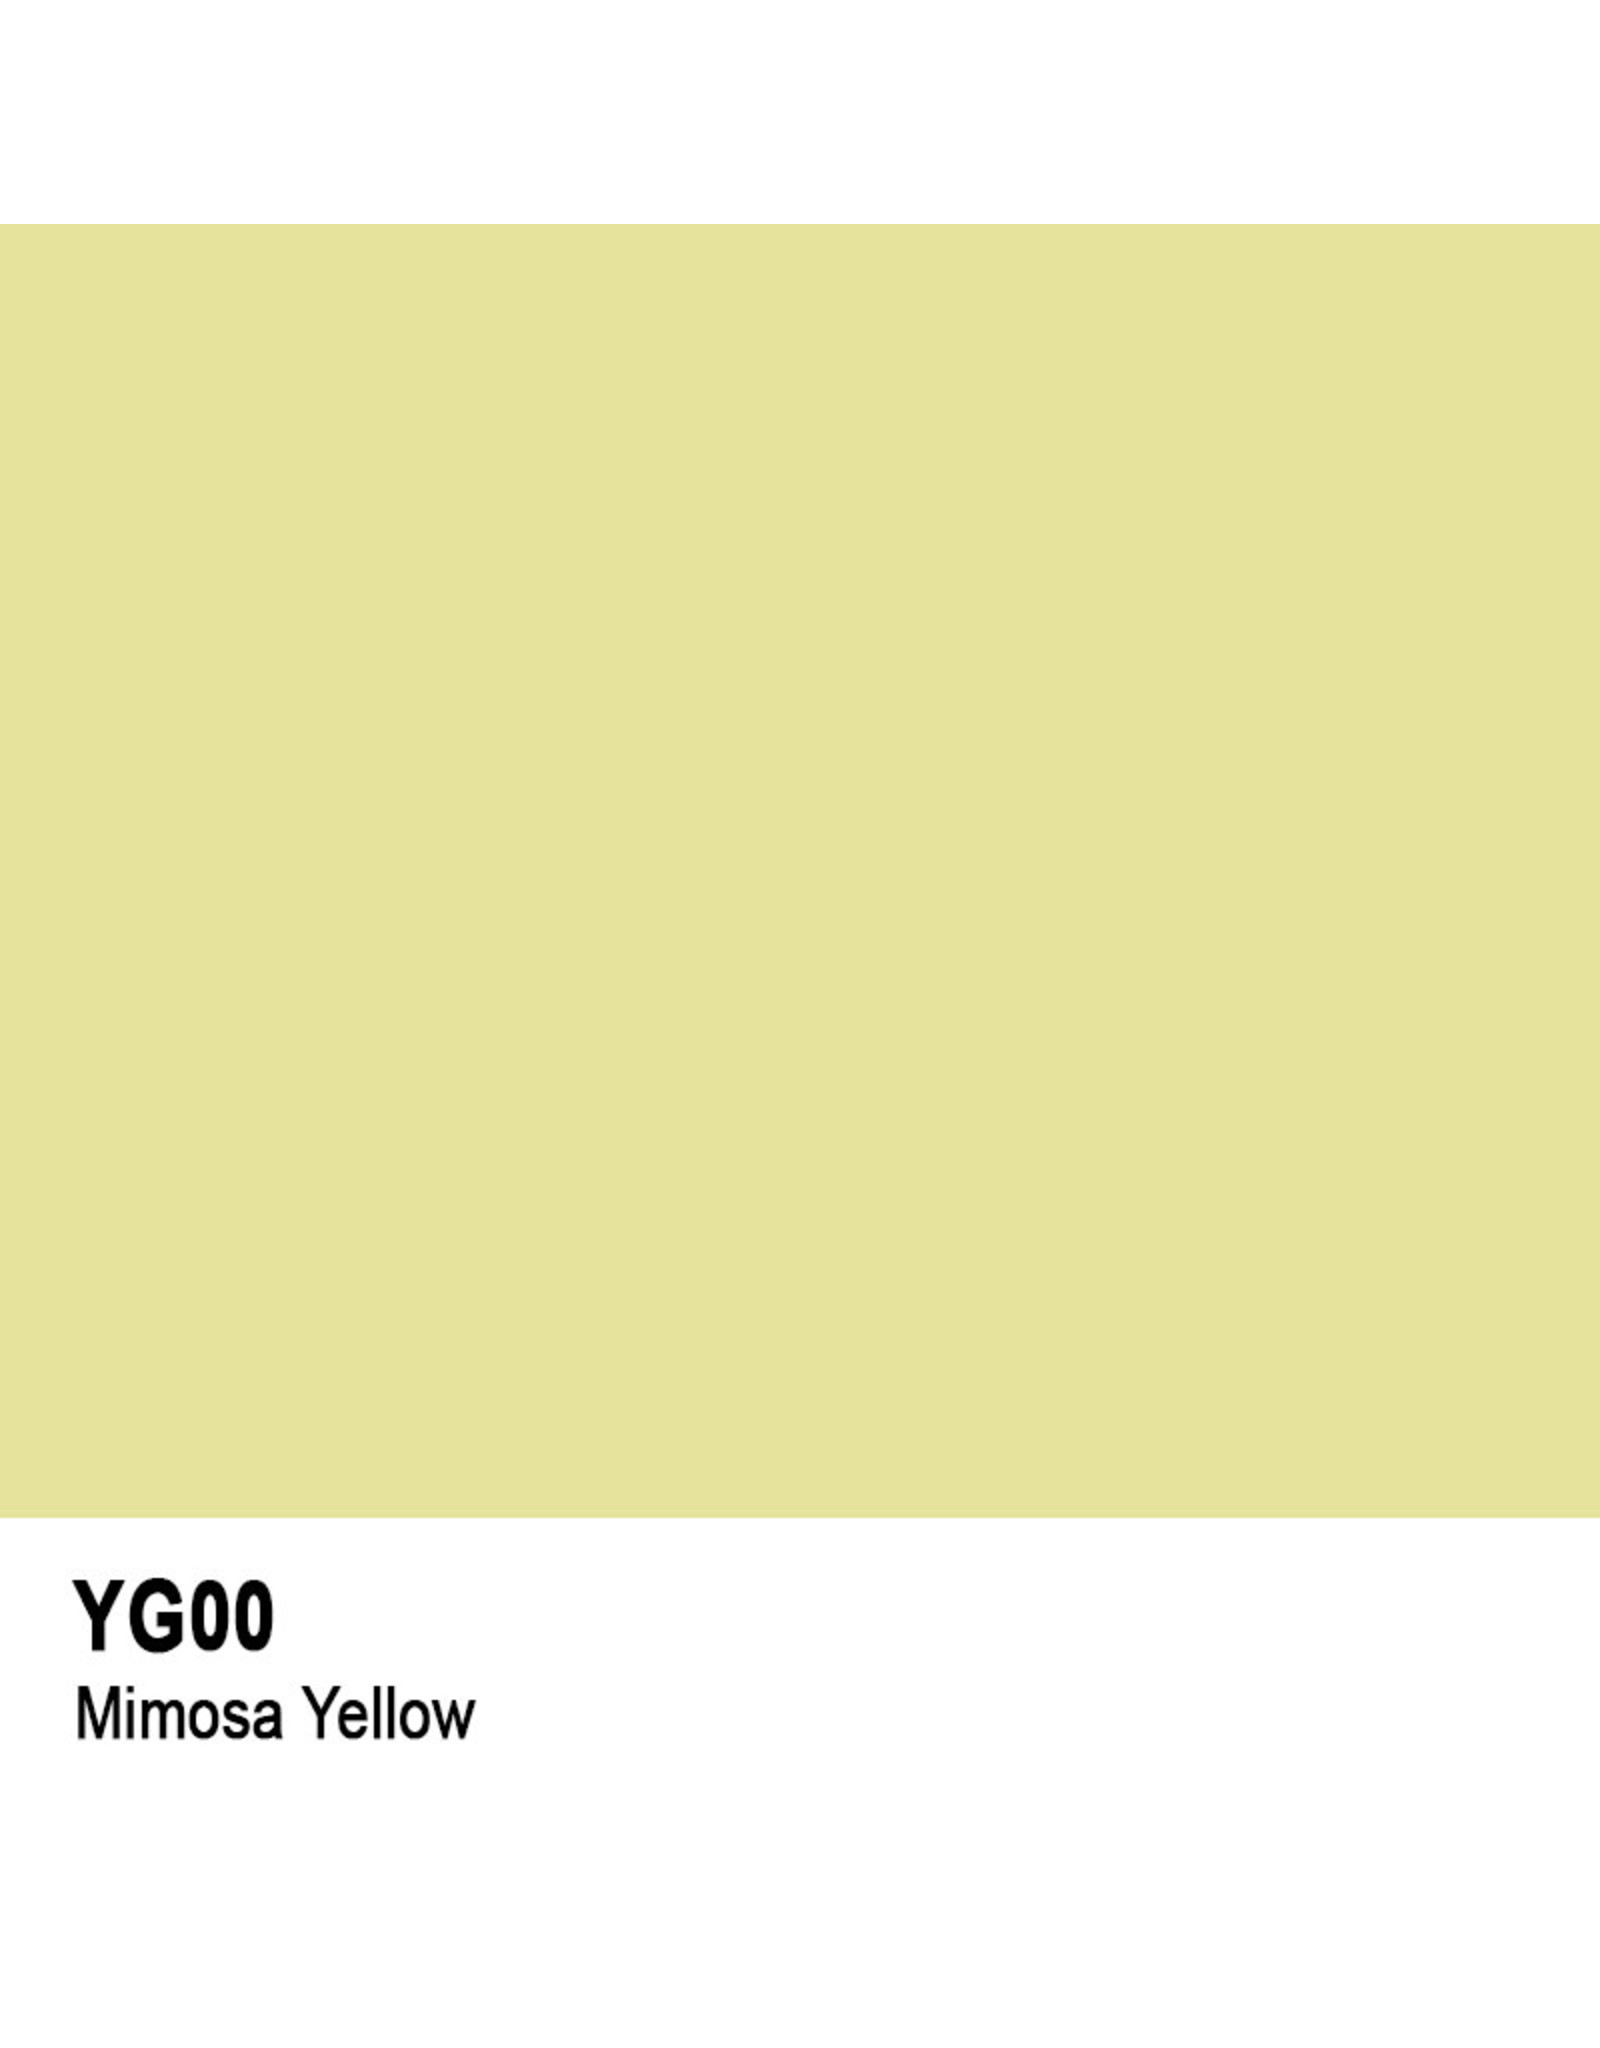 COPIC COPIC YG00 MIMOSA YELLOW REFILL